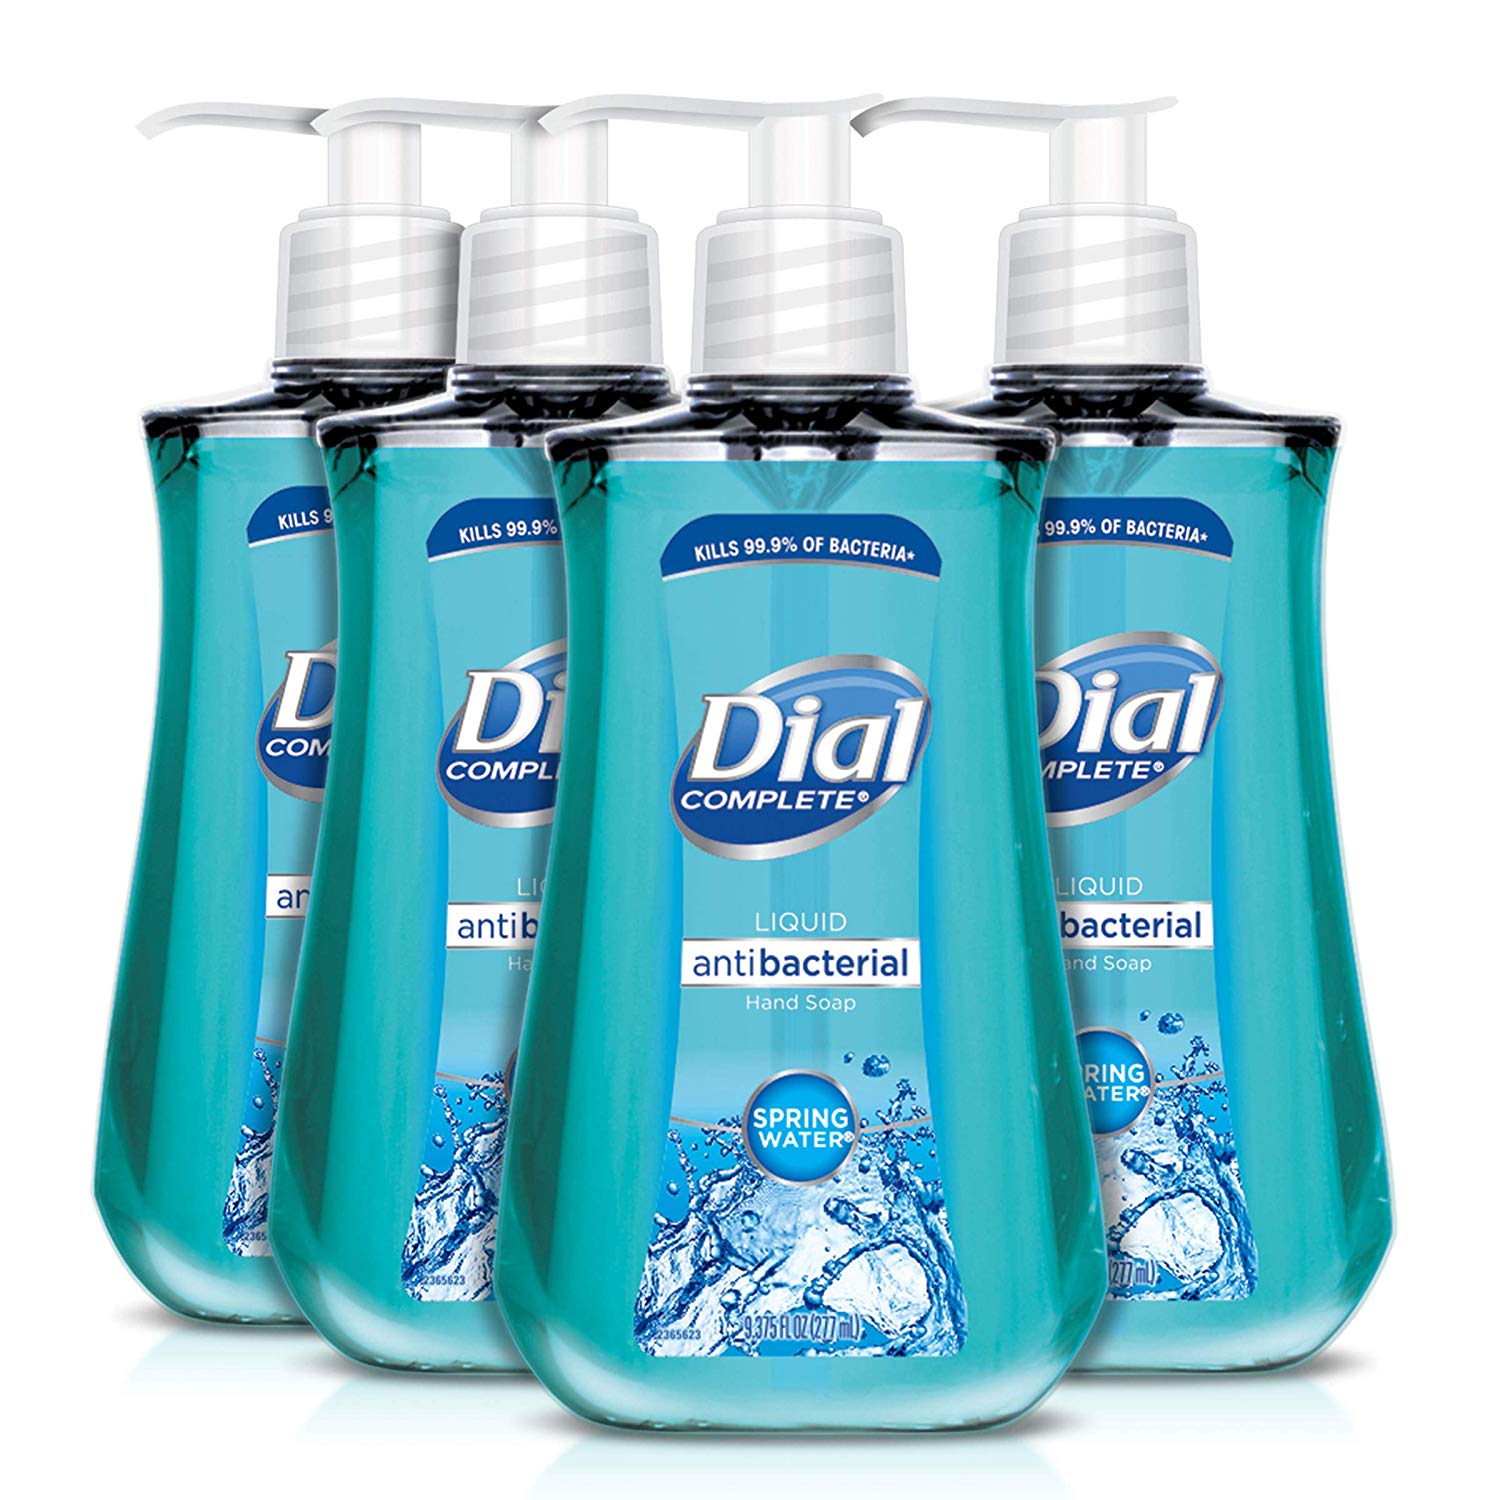 Dial Antibacterial Liquid Hand Soap, Spring Water, 9.375 Ounce (Count of 4)